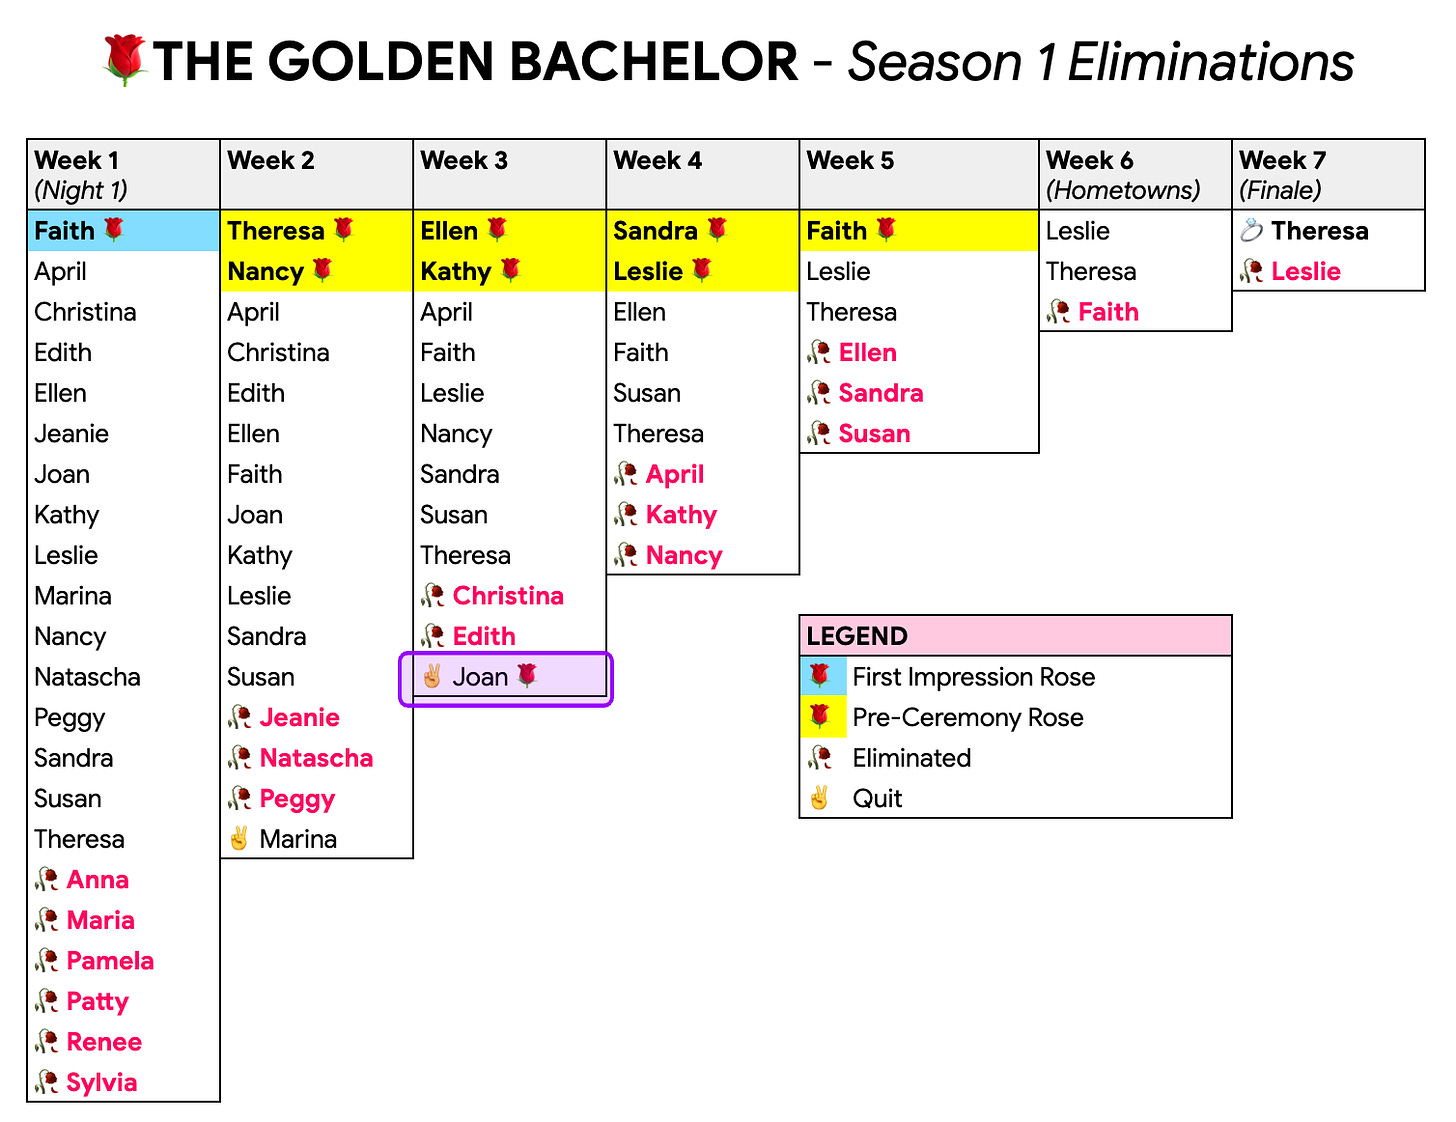 Each week of The Golden Bachelor Season 1 Contestants: who got roses and dates and who was eliminated or quit.